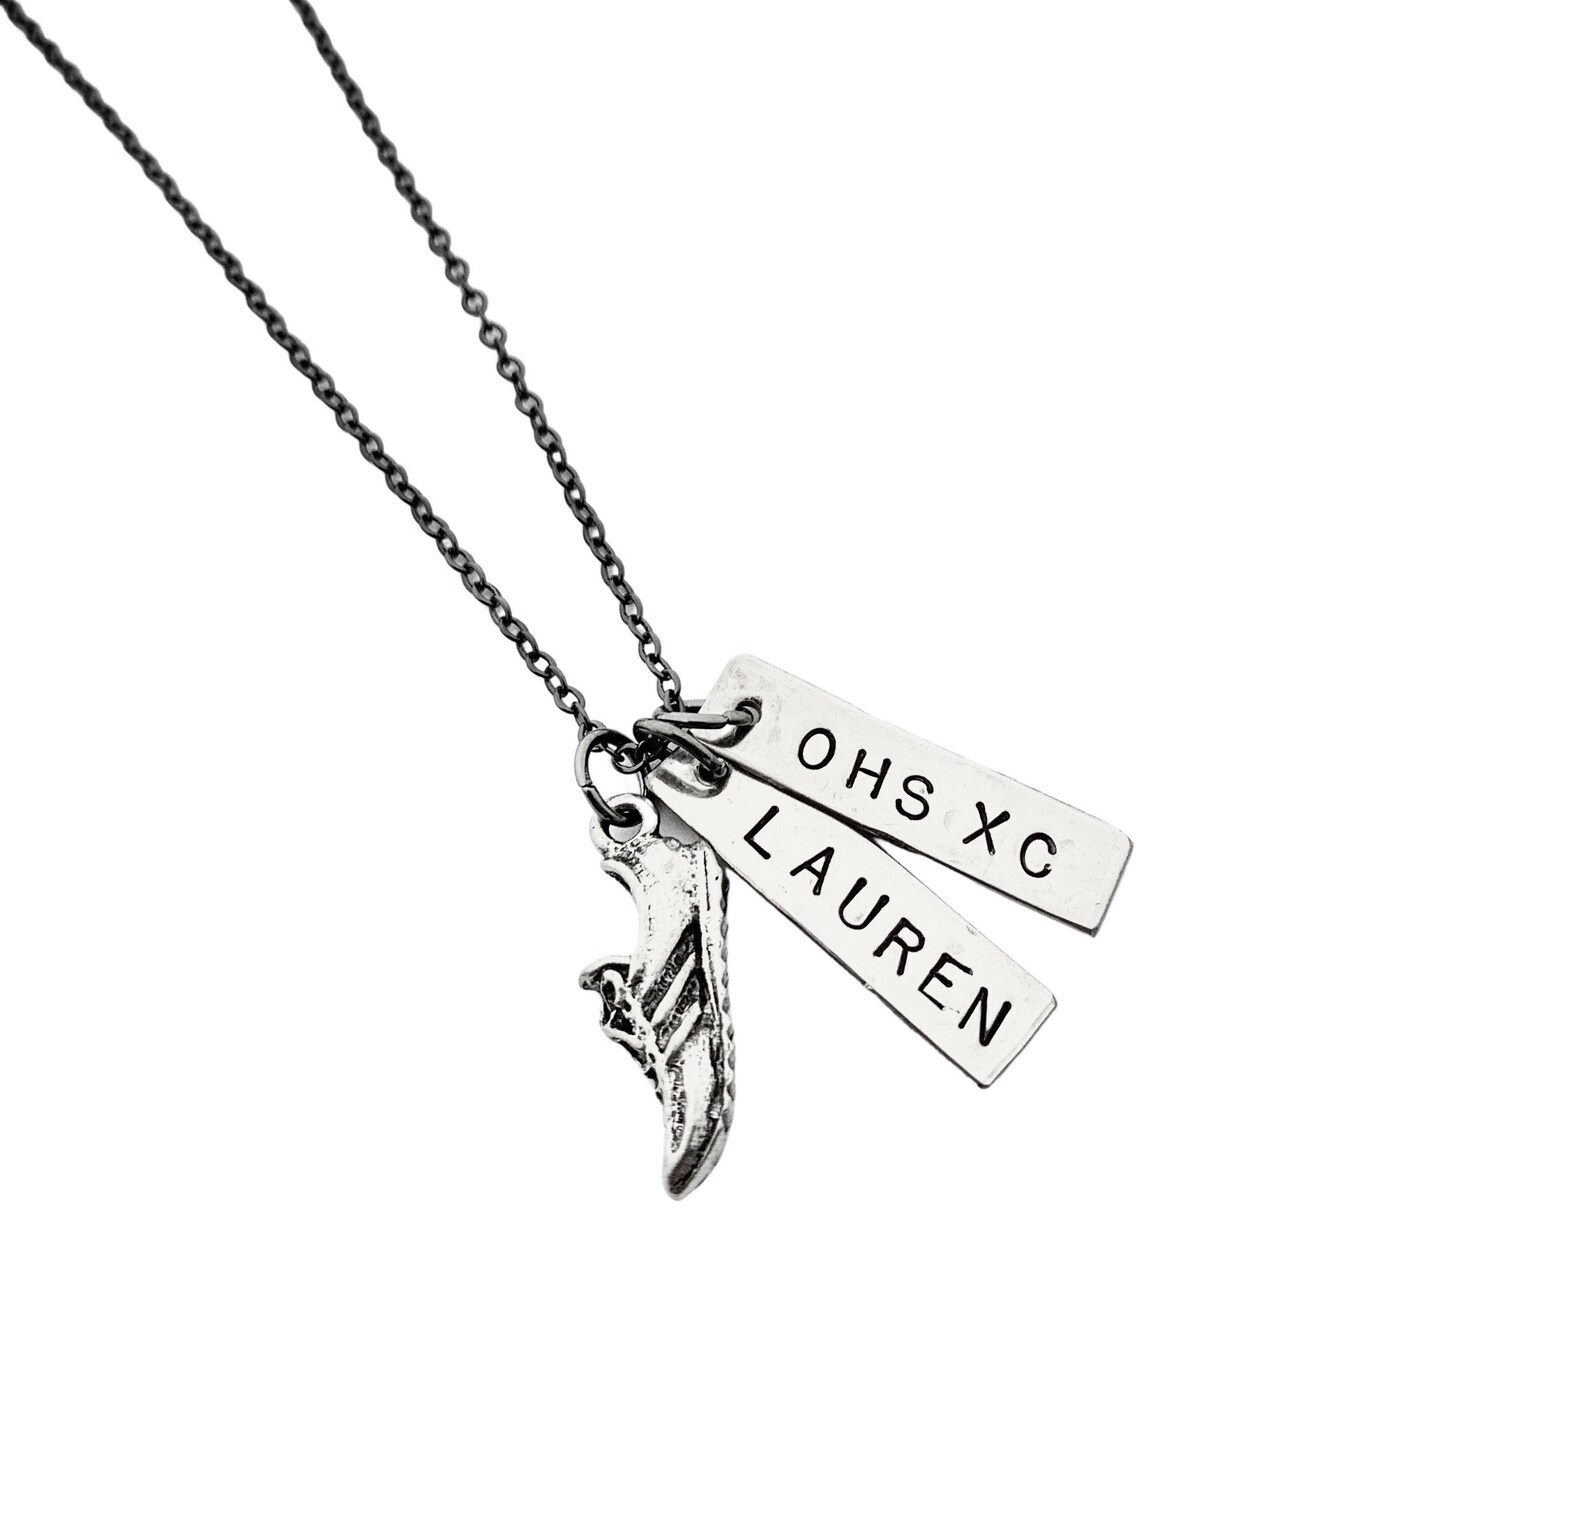 This cross country necklace is handstamped by a leading seller on Etsy: TheRunHome.